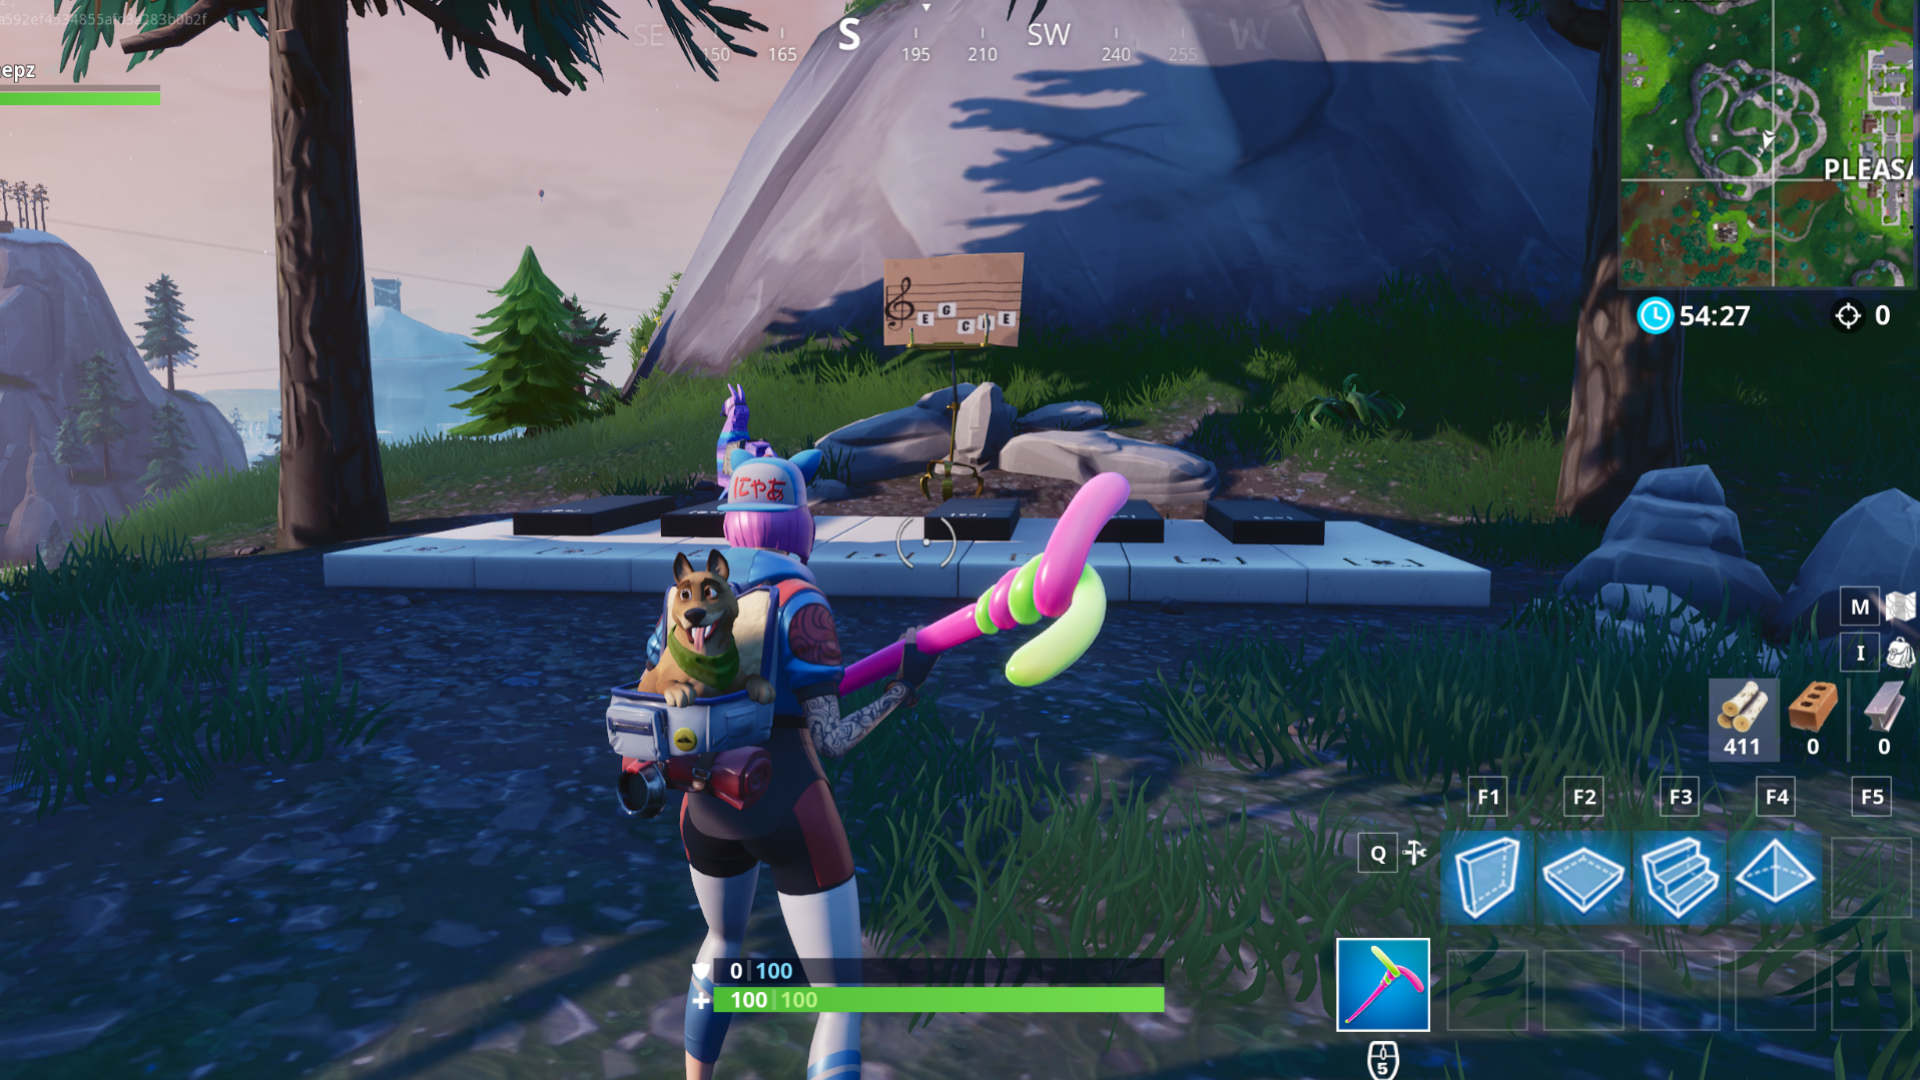 play the sheet music at the piano near pleasant park